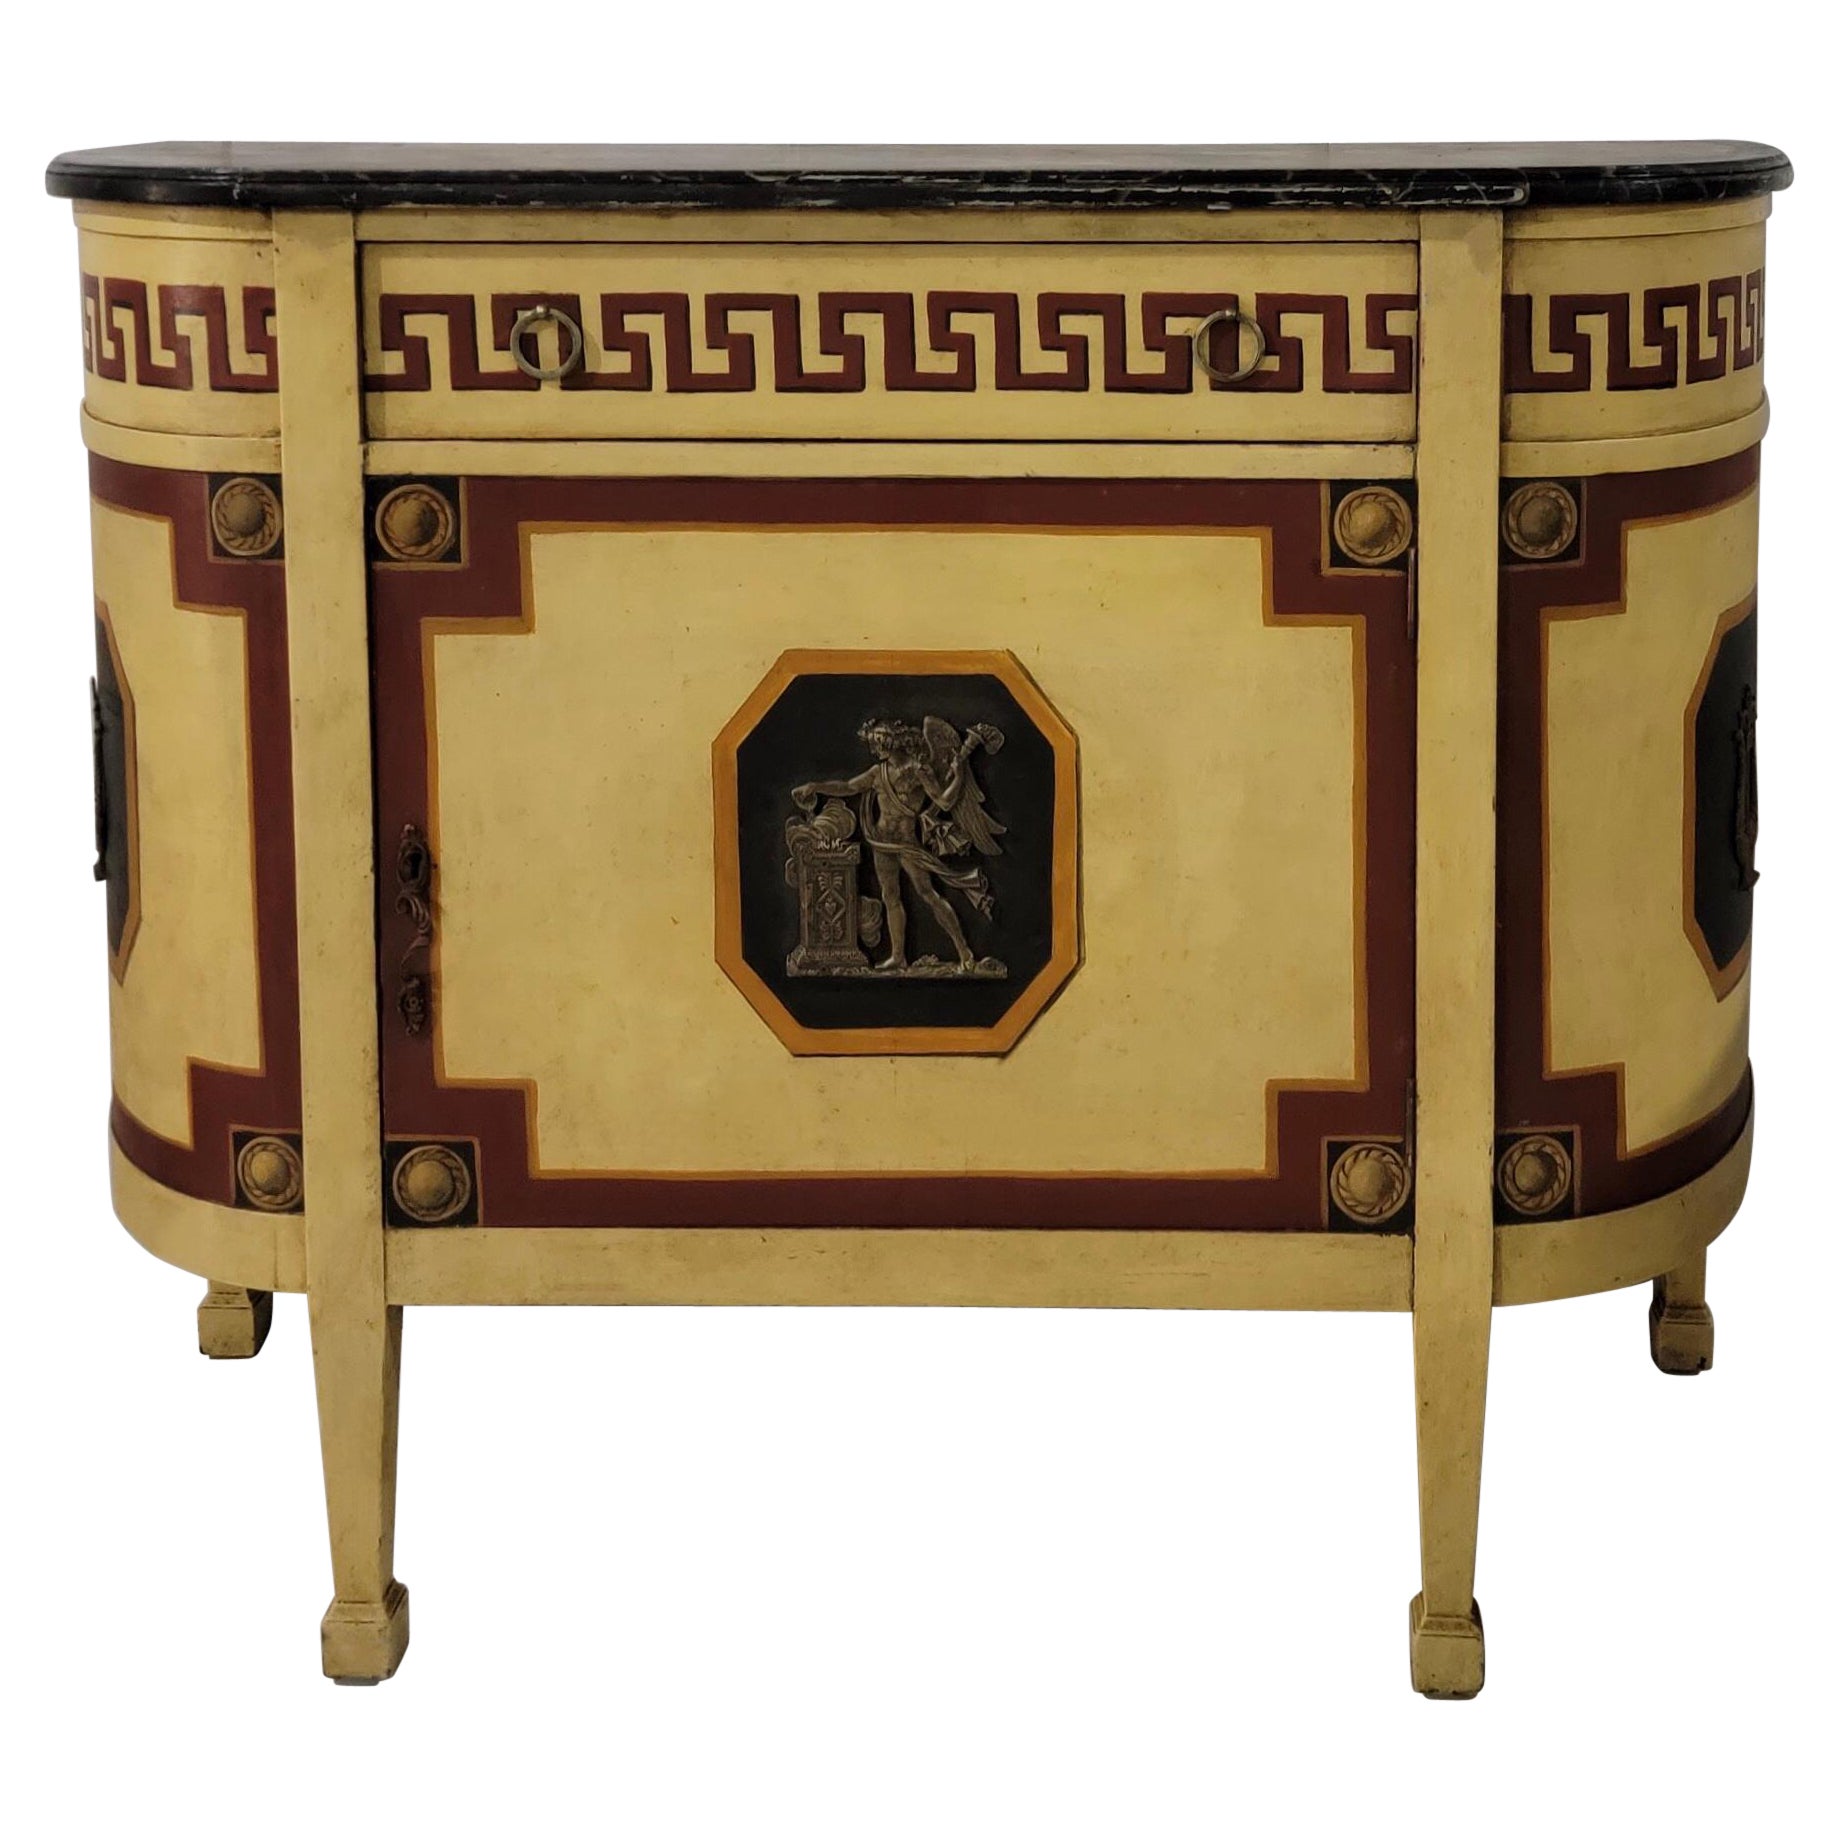 Early 20th-C. Italian Neo-Classical Style Faux Marble Painted Demilune Cabinet